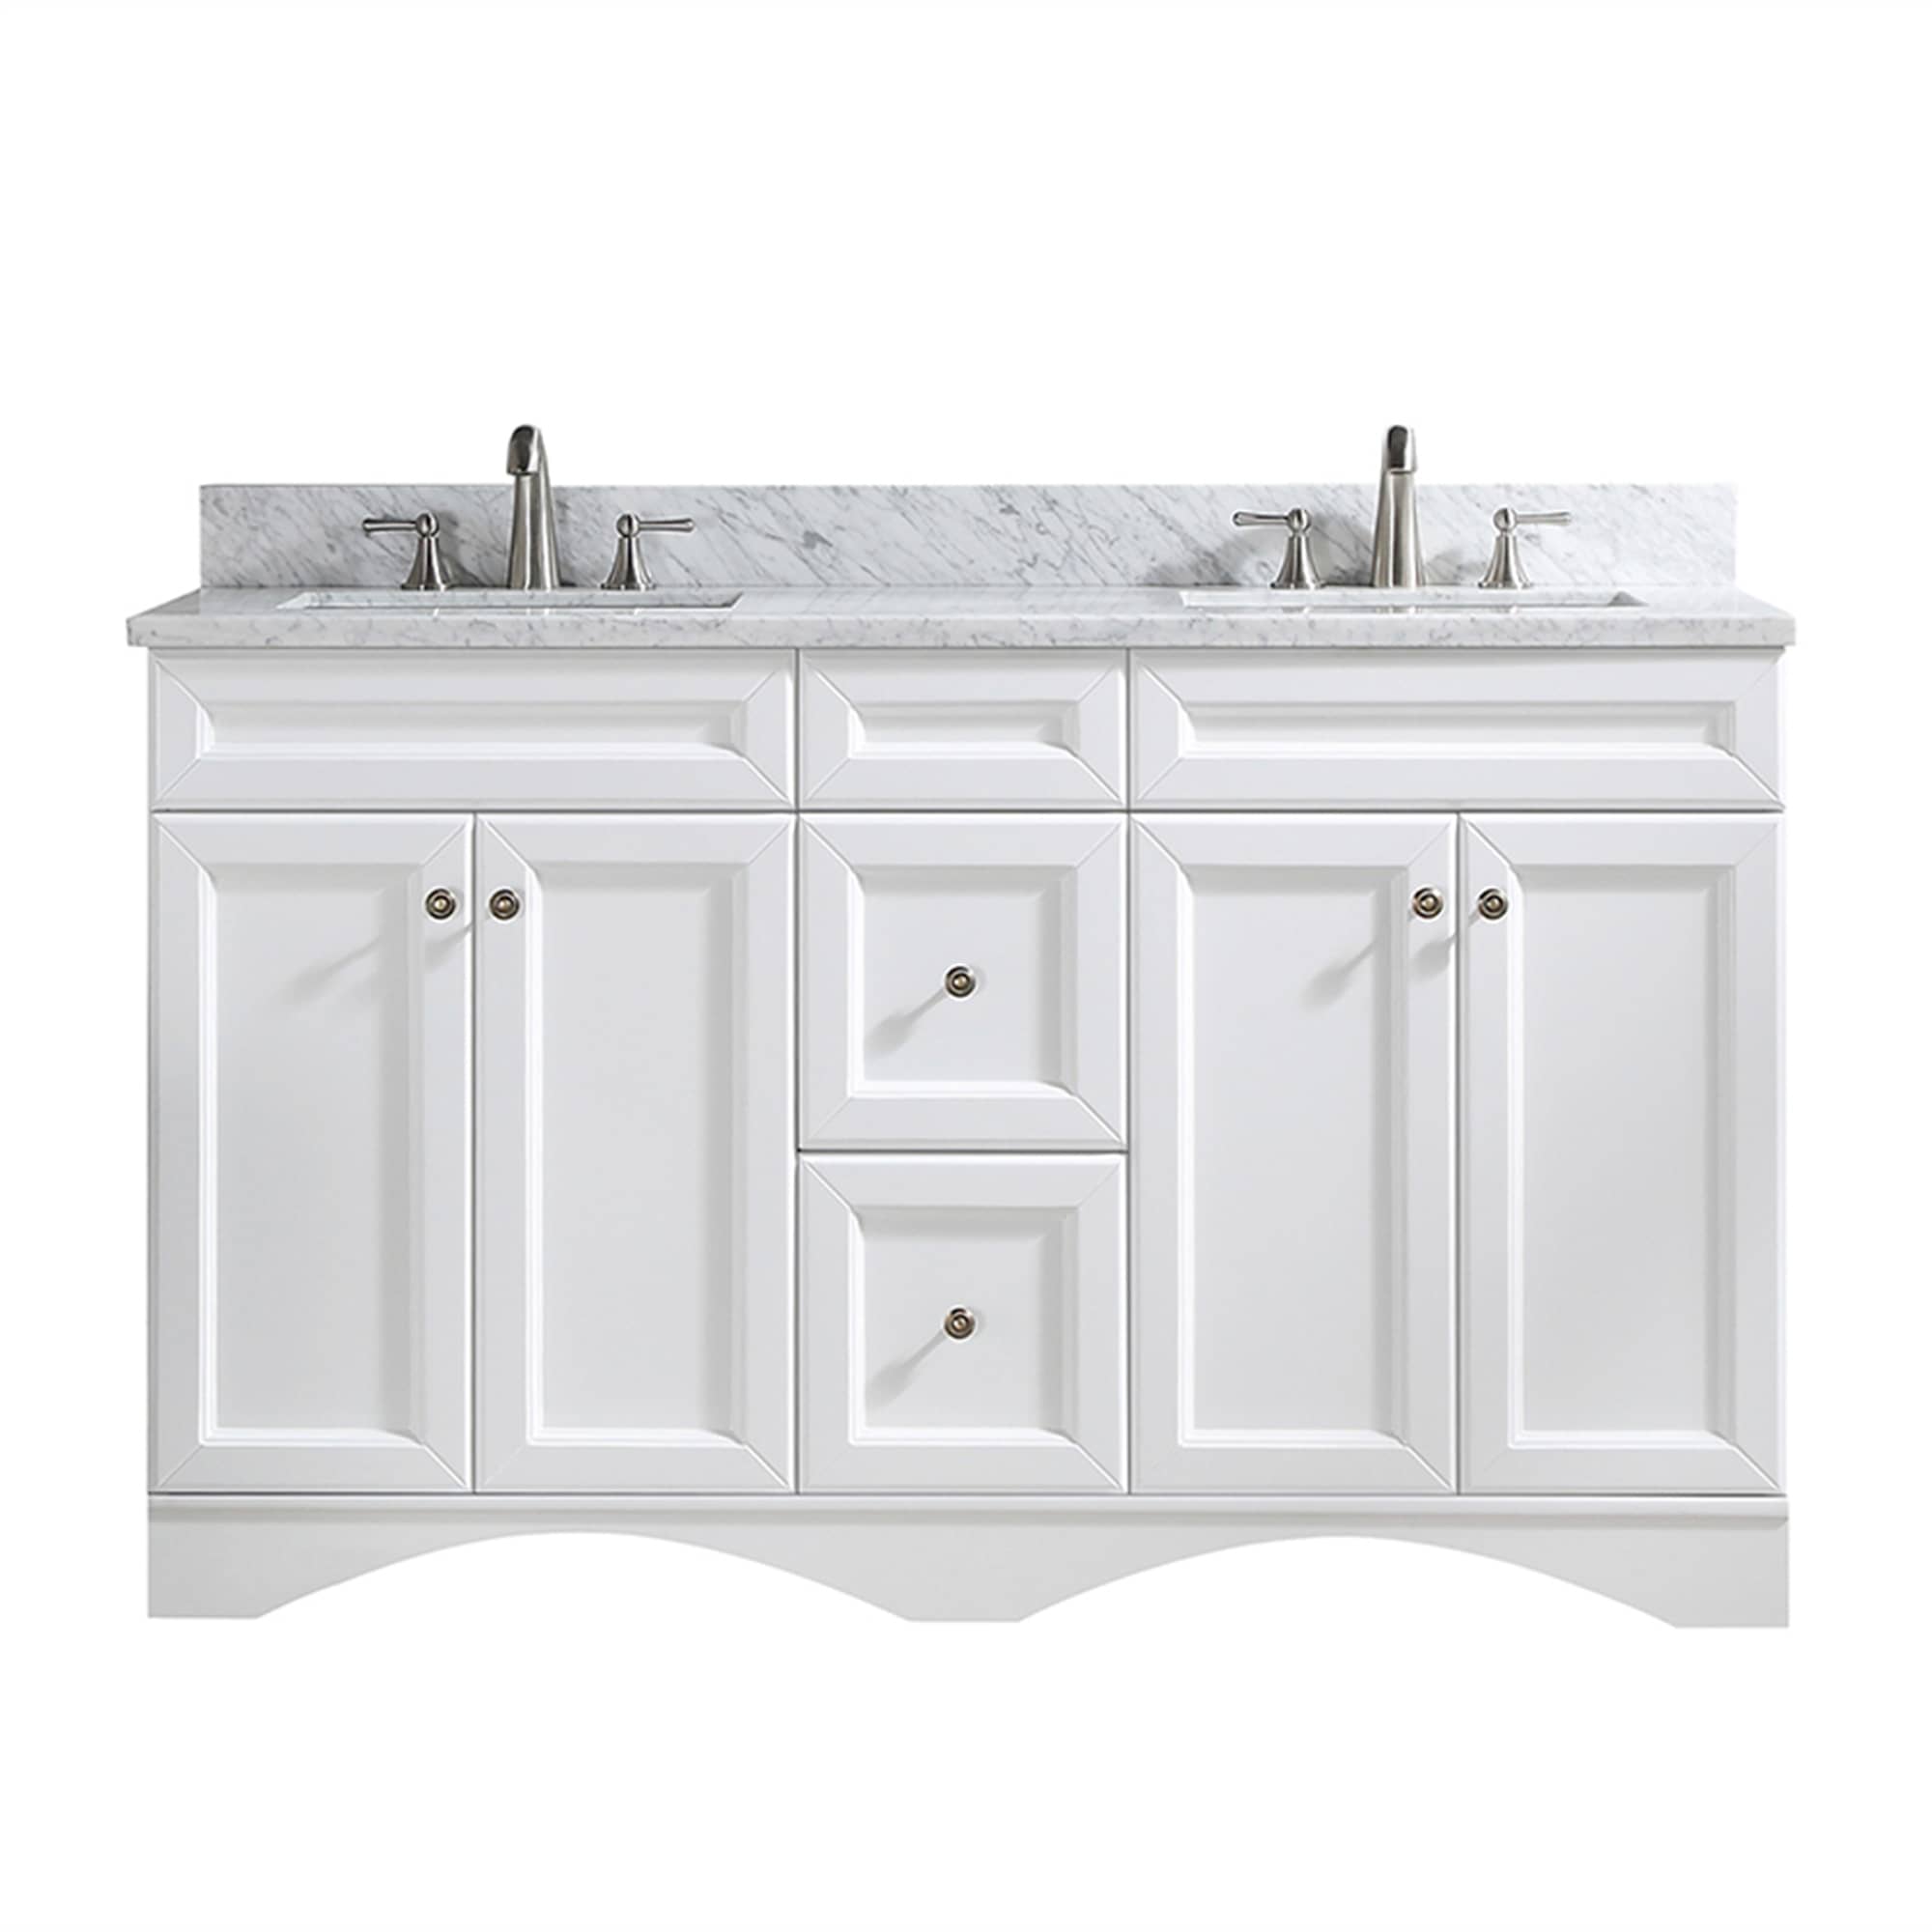 CASAINC 60 Inch Bath Vanity in White with White Top and Basin （60 W x 22D x 35.4“H ）